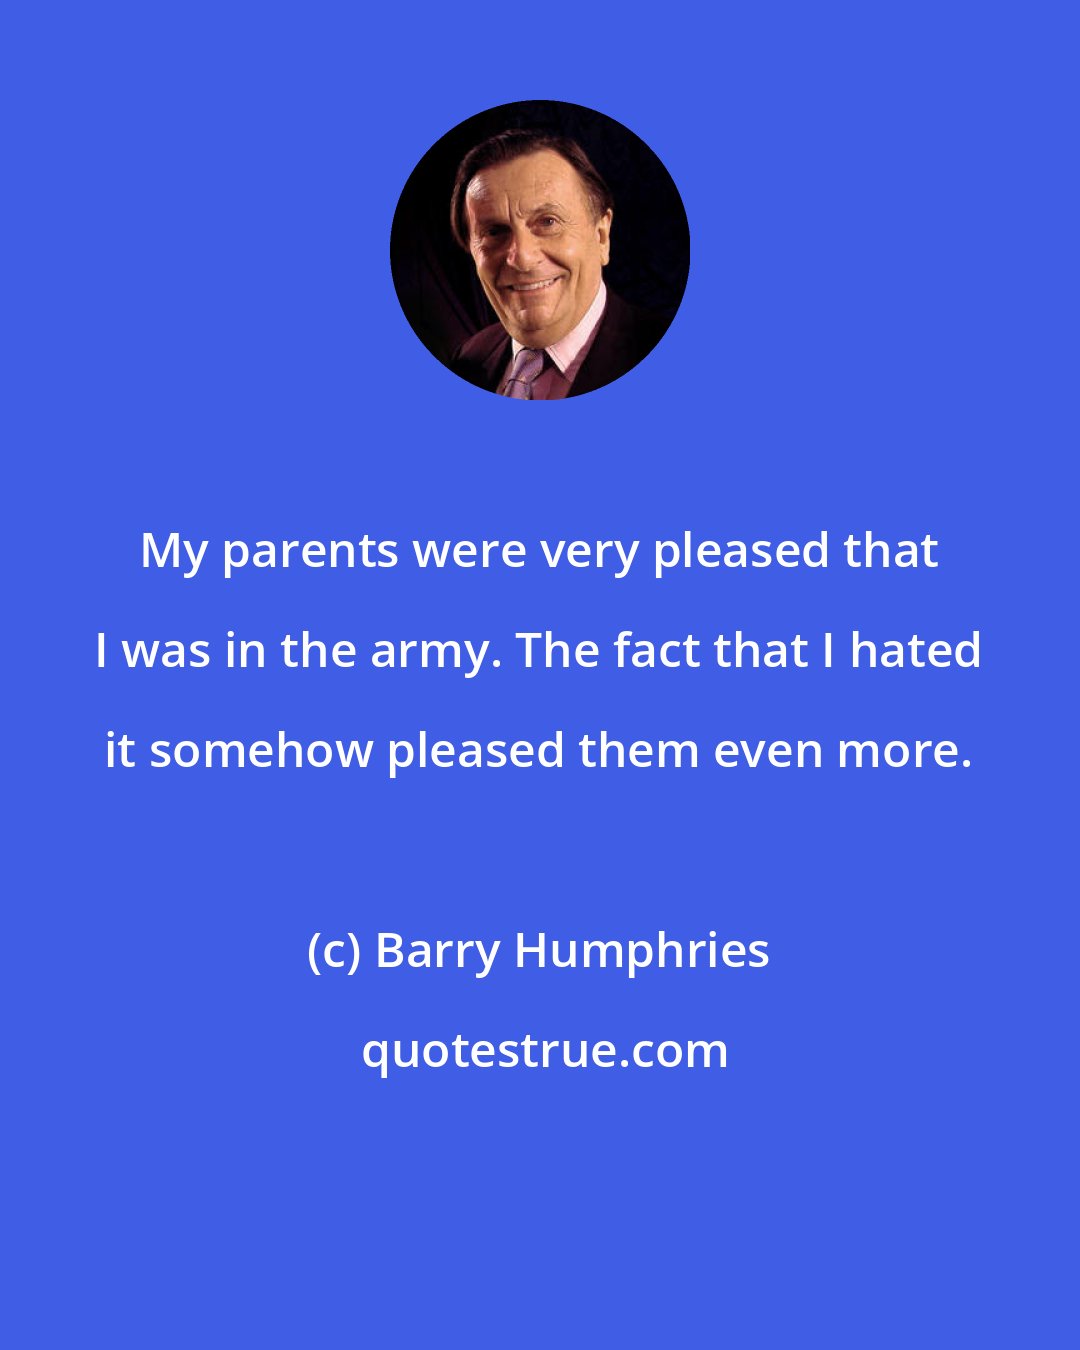 Barry Humphries: My parents were very pleased that I was in the army. The fact that I hated it somehow pleased them even more.